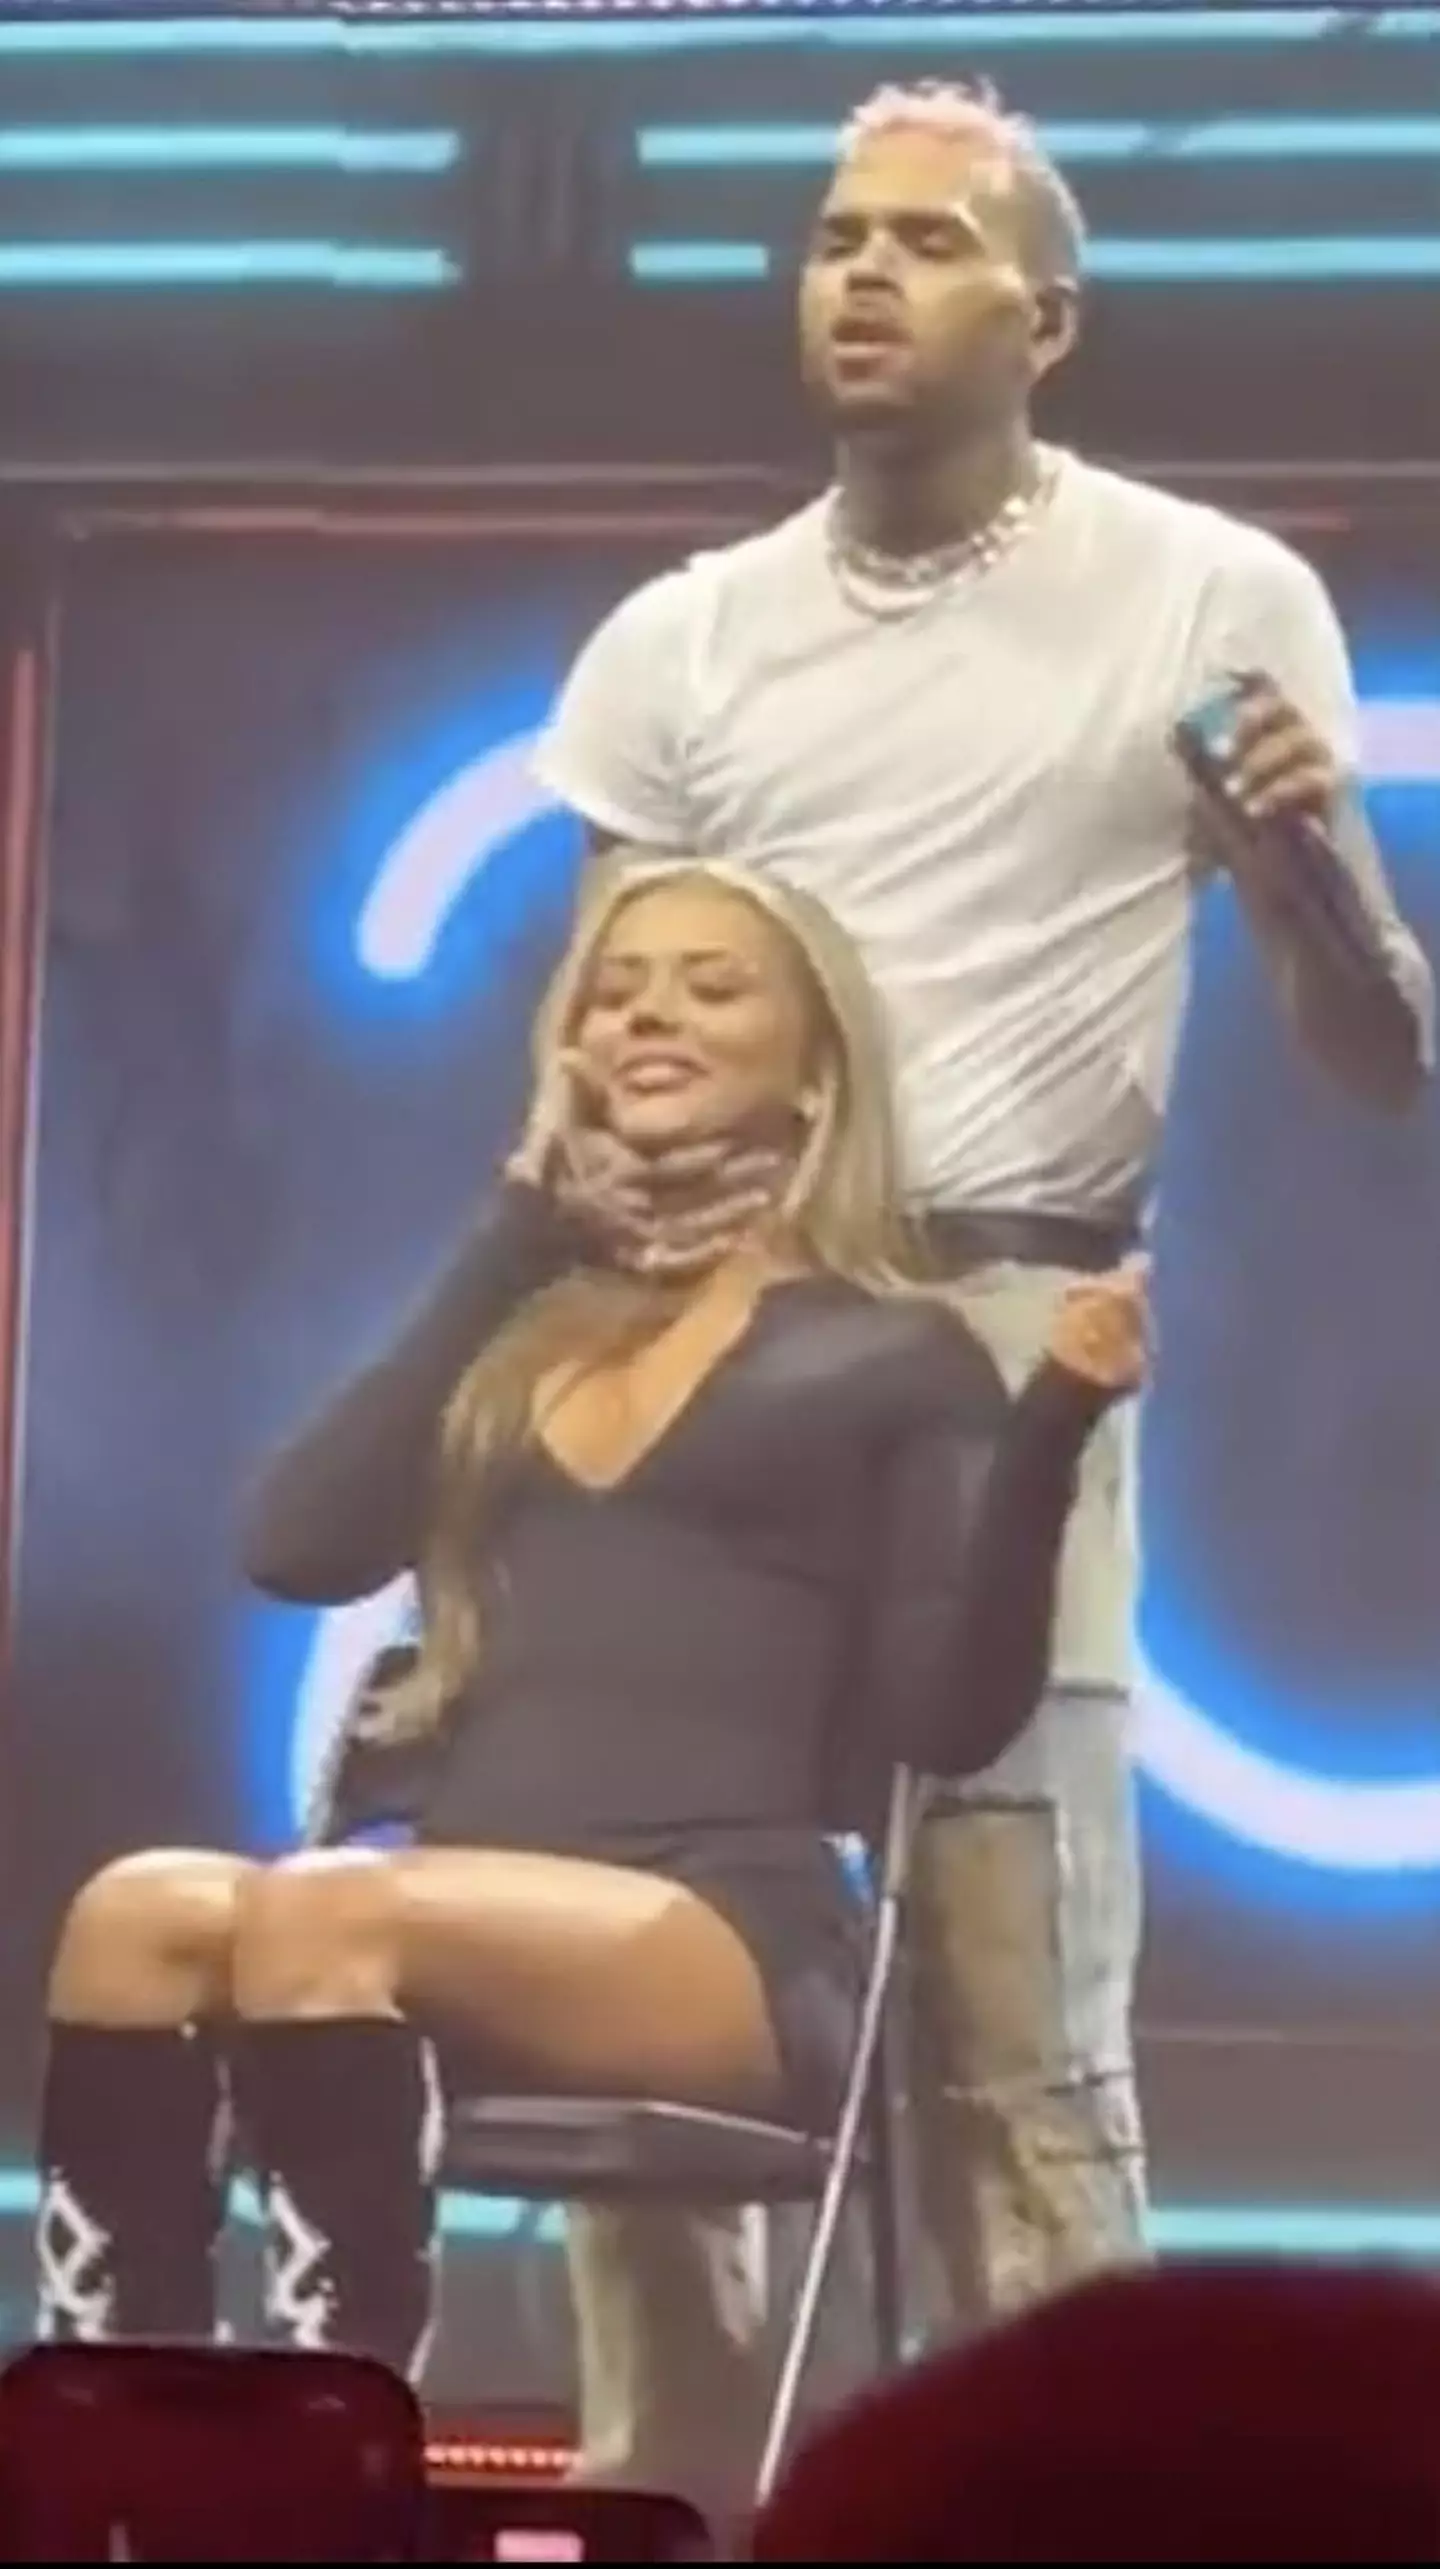 Brown has been criticised for grabbing the neck of Love Island's Natalia Zoppa during his famous on-stage lap dance.